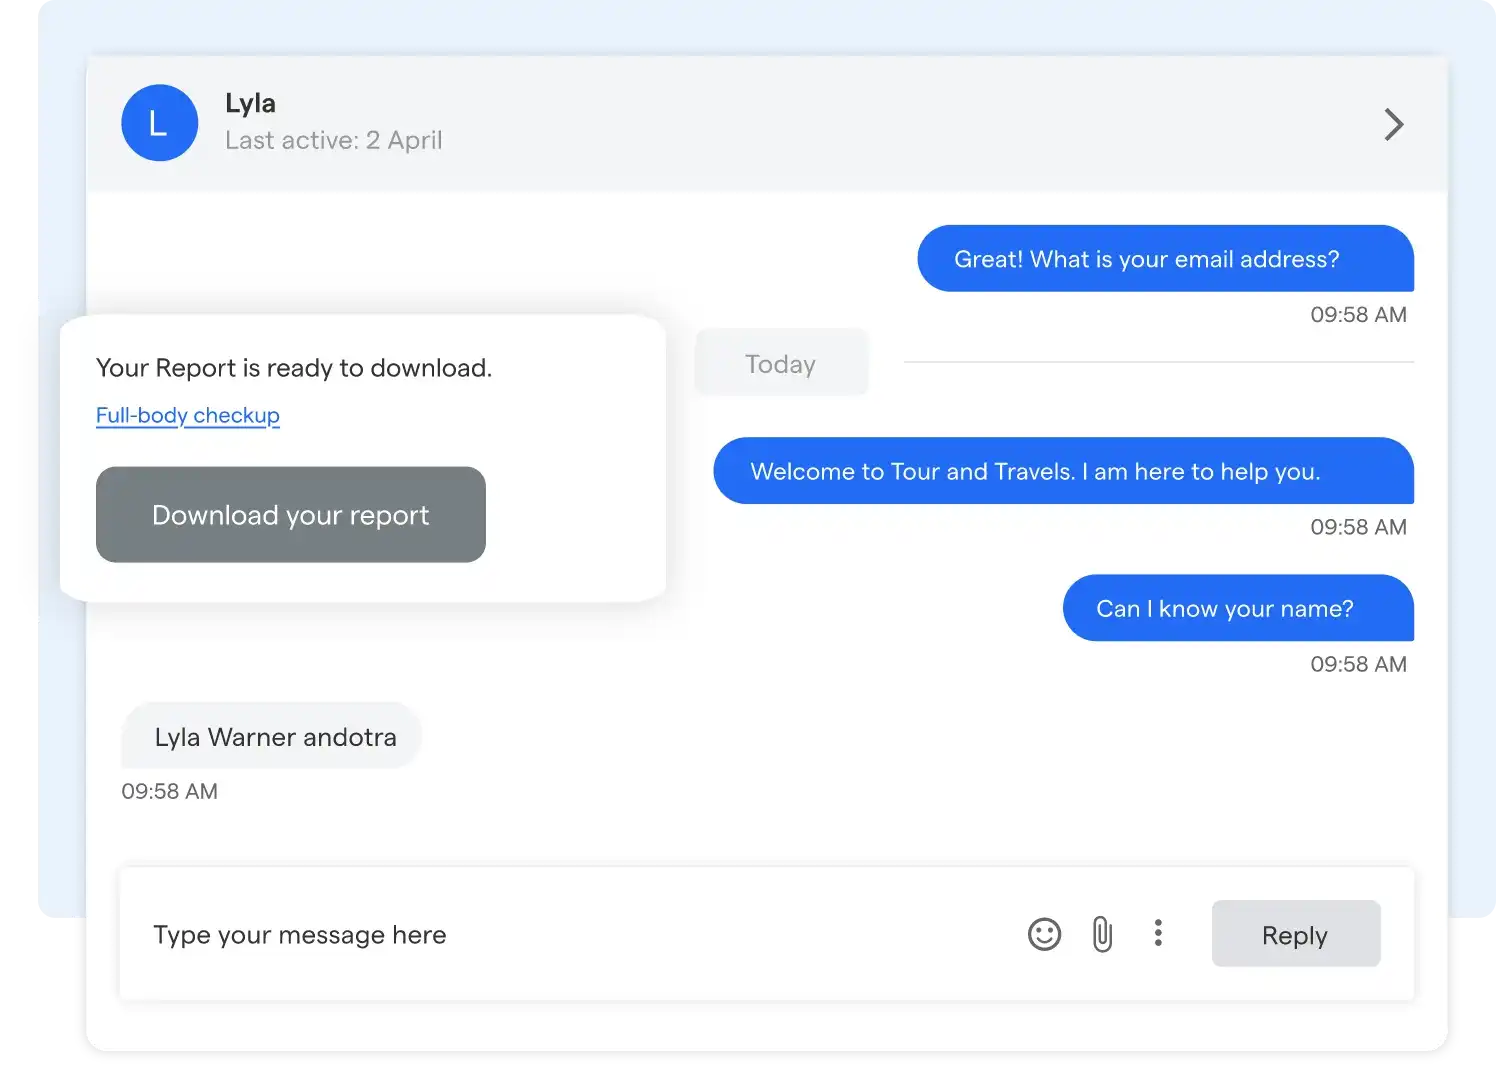 Best Practices for Implementing Website Chatbots